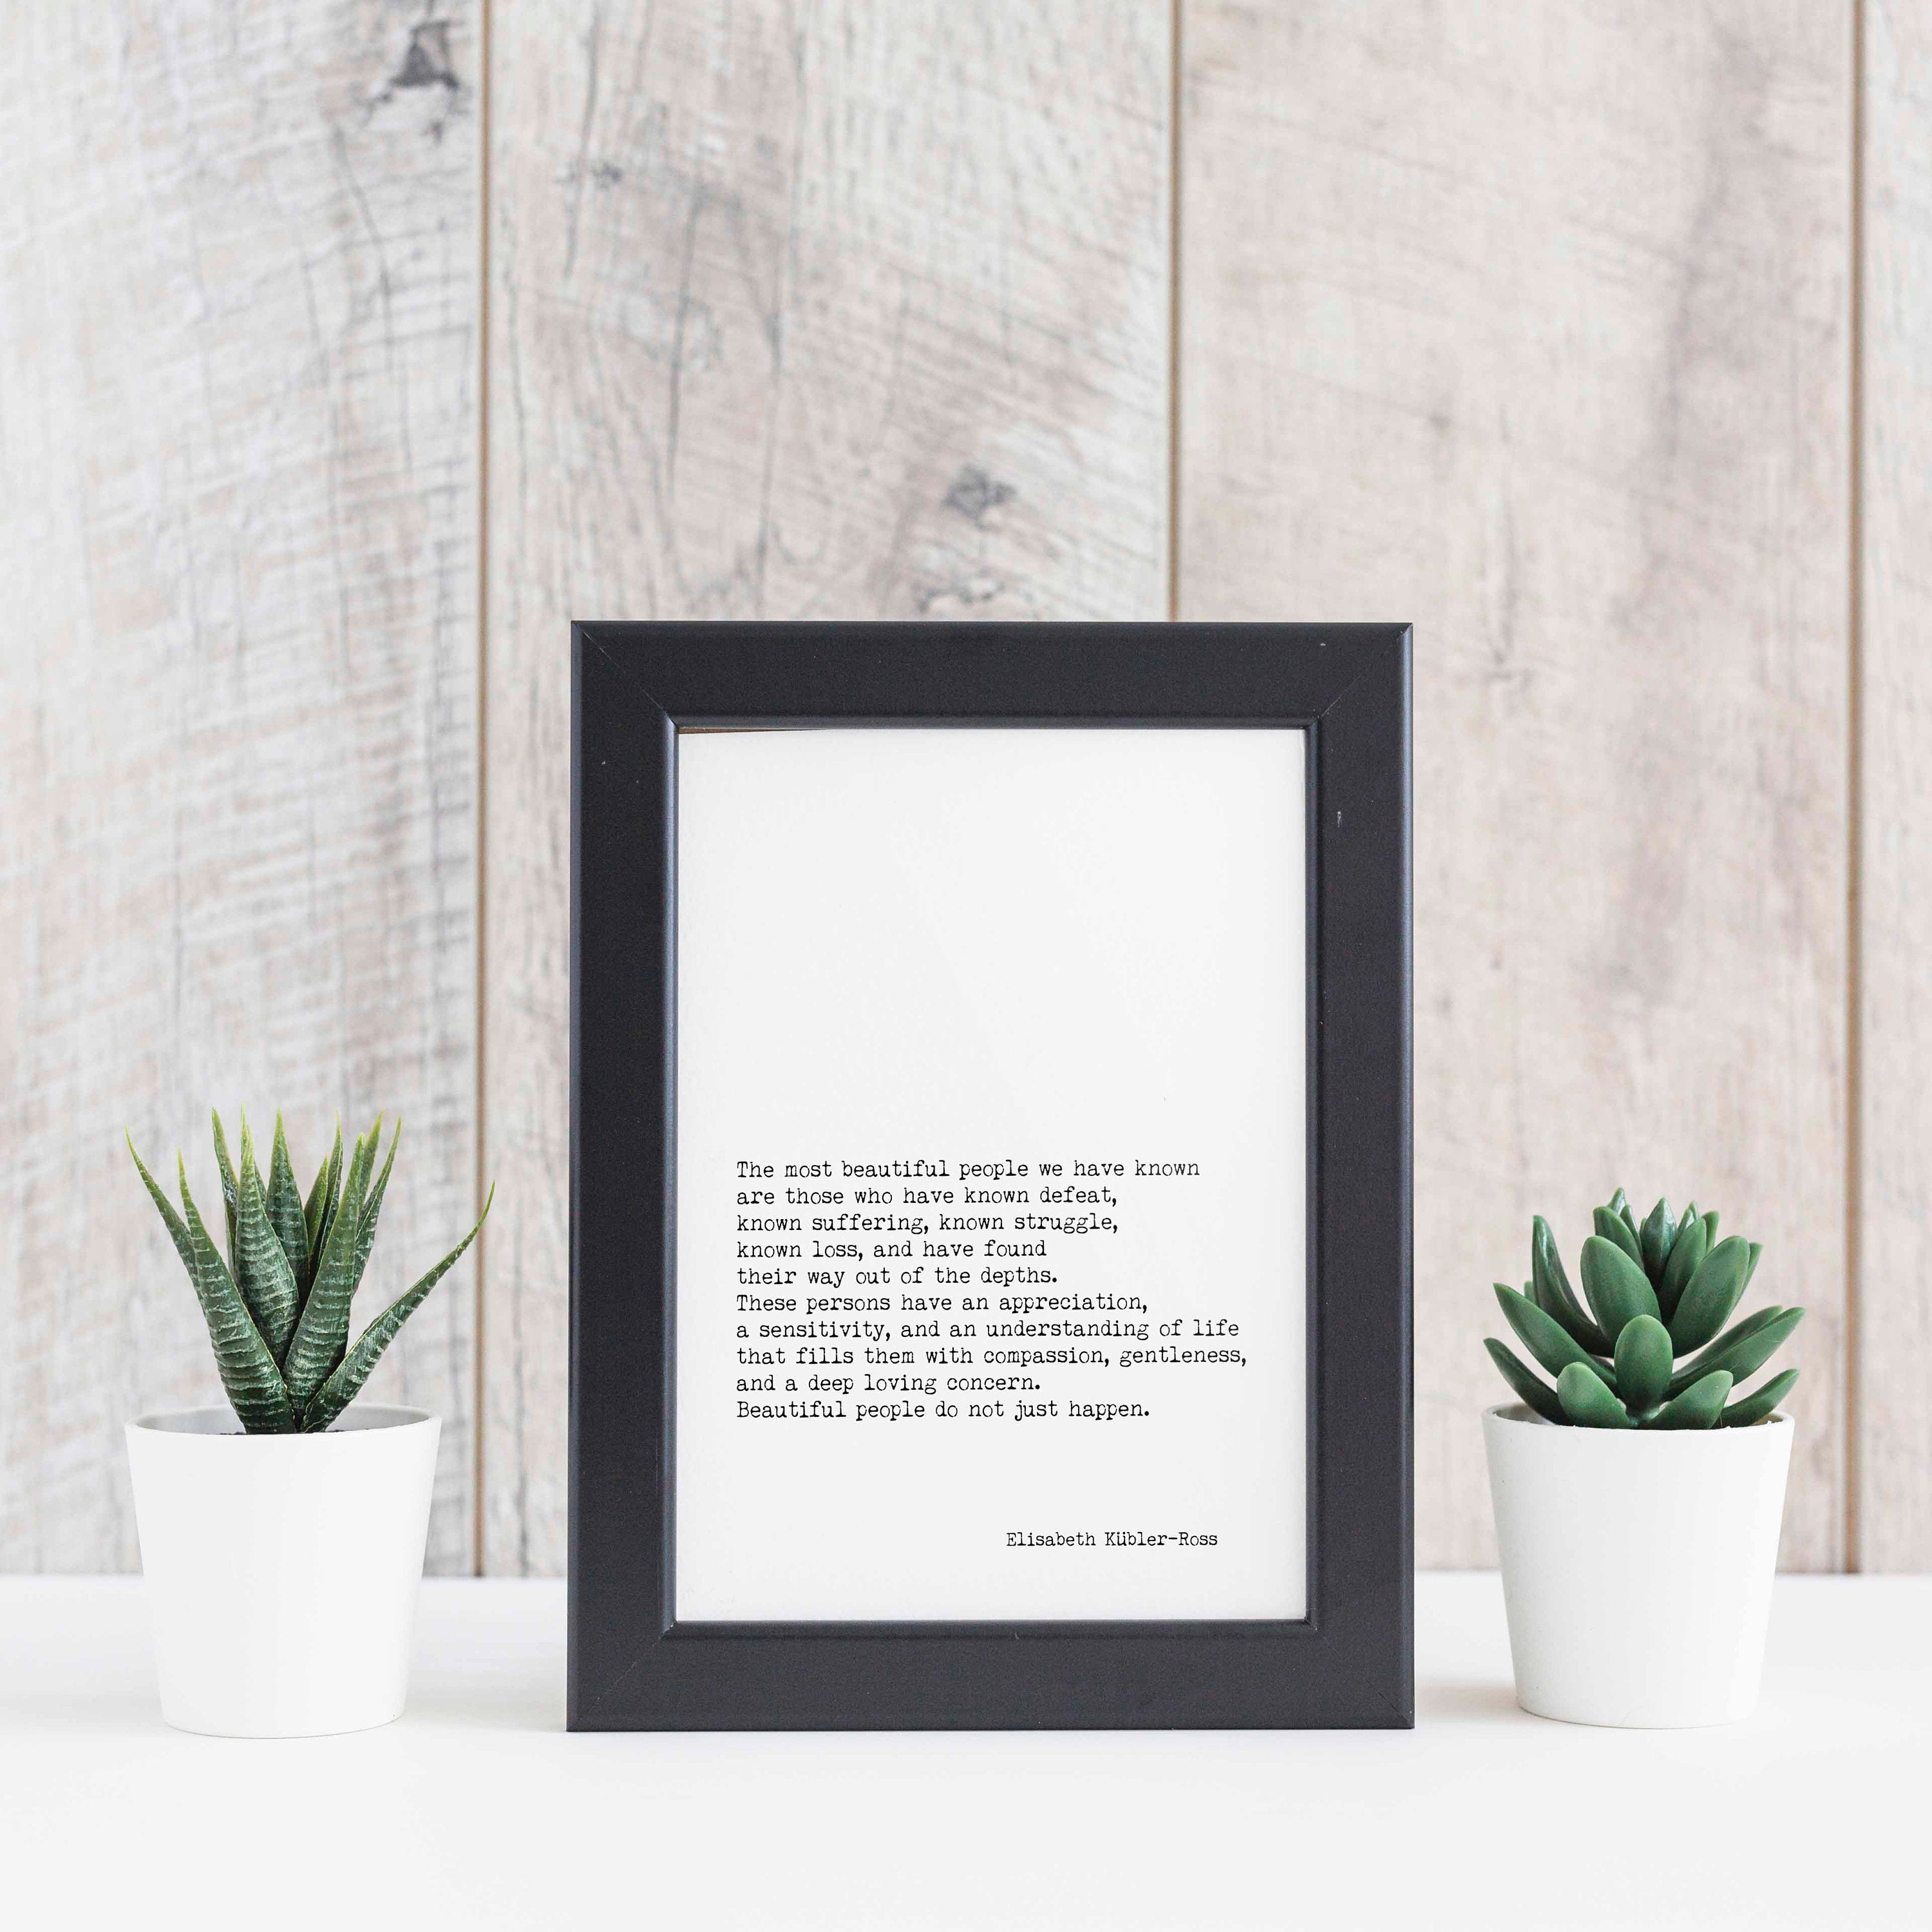 Elisabeth Kubler-Ross Quote Print, The Most Beautiful People Unframed Wall Art Prints in Black & White Inspirational Life Quote Poster